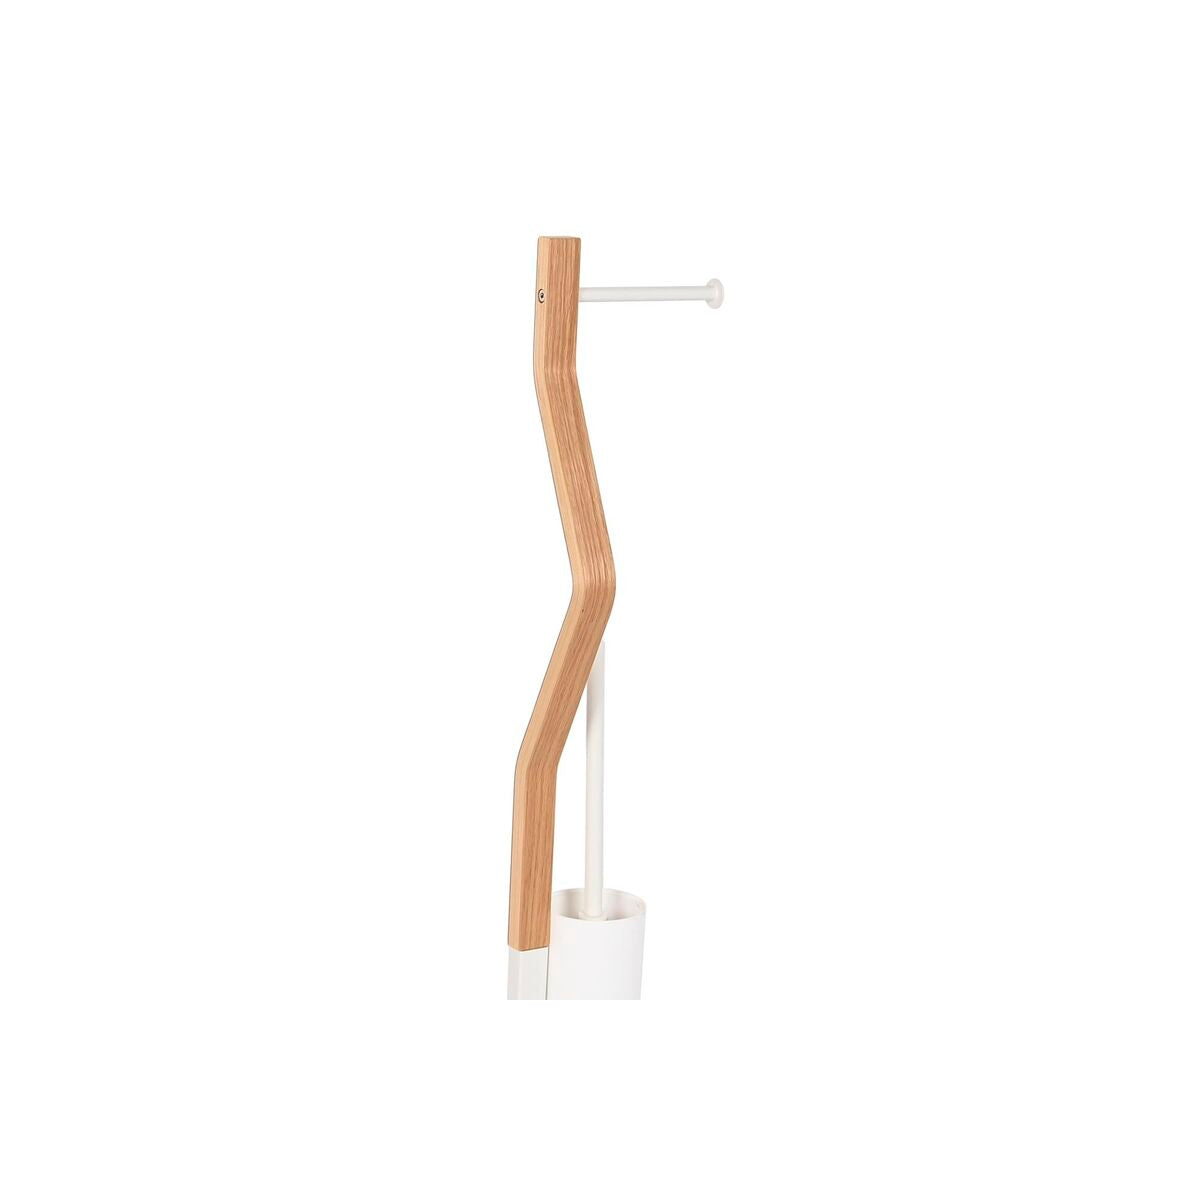 Toilet Paper Holder with Brush Stand DKD Home Decor Natural Wood Steel